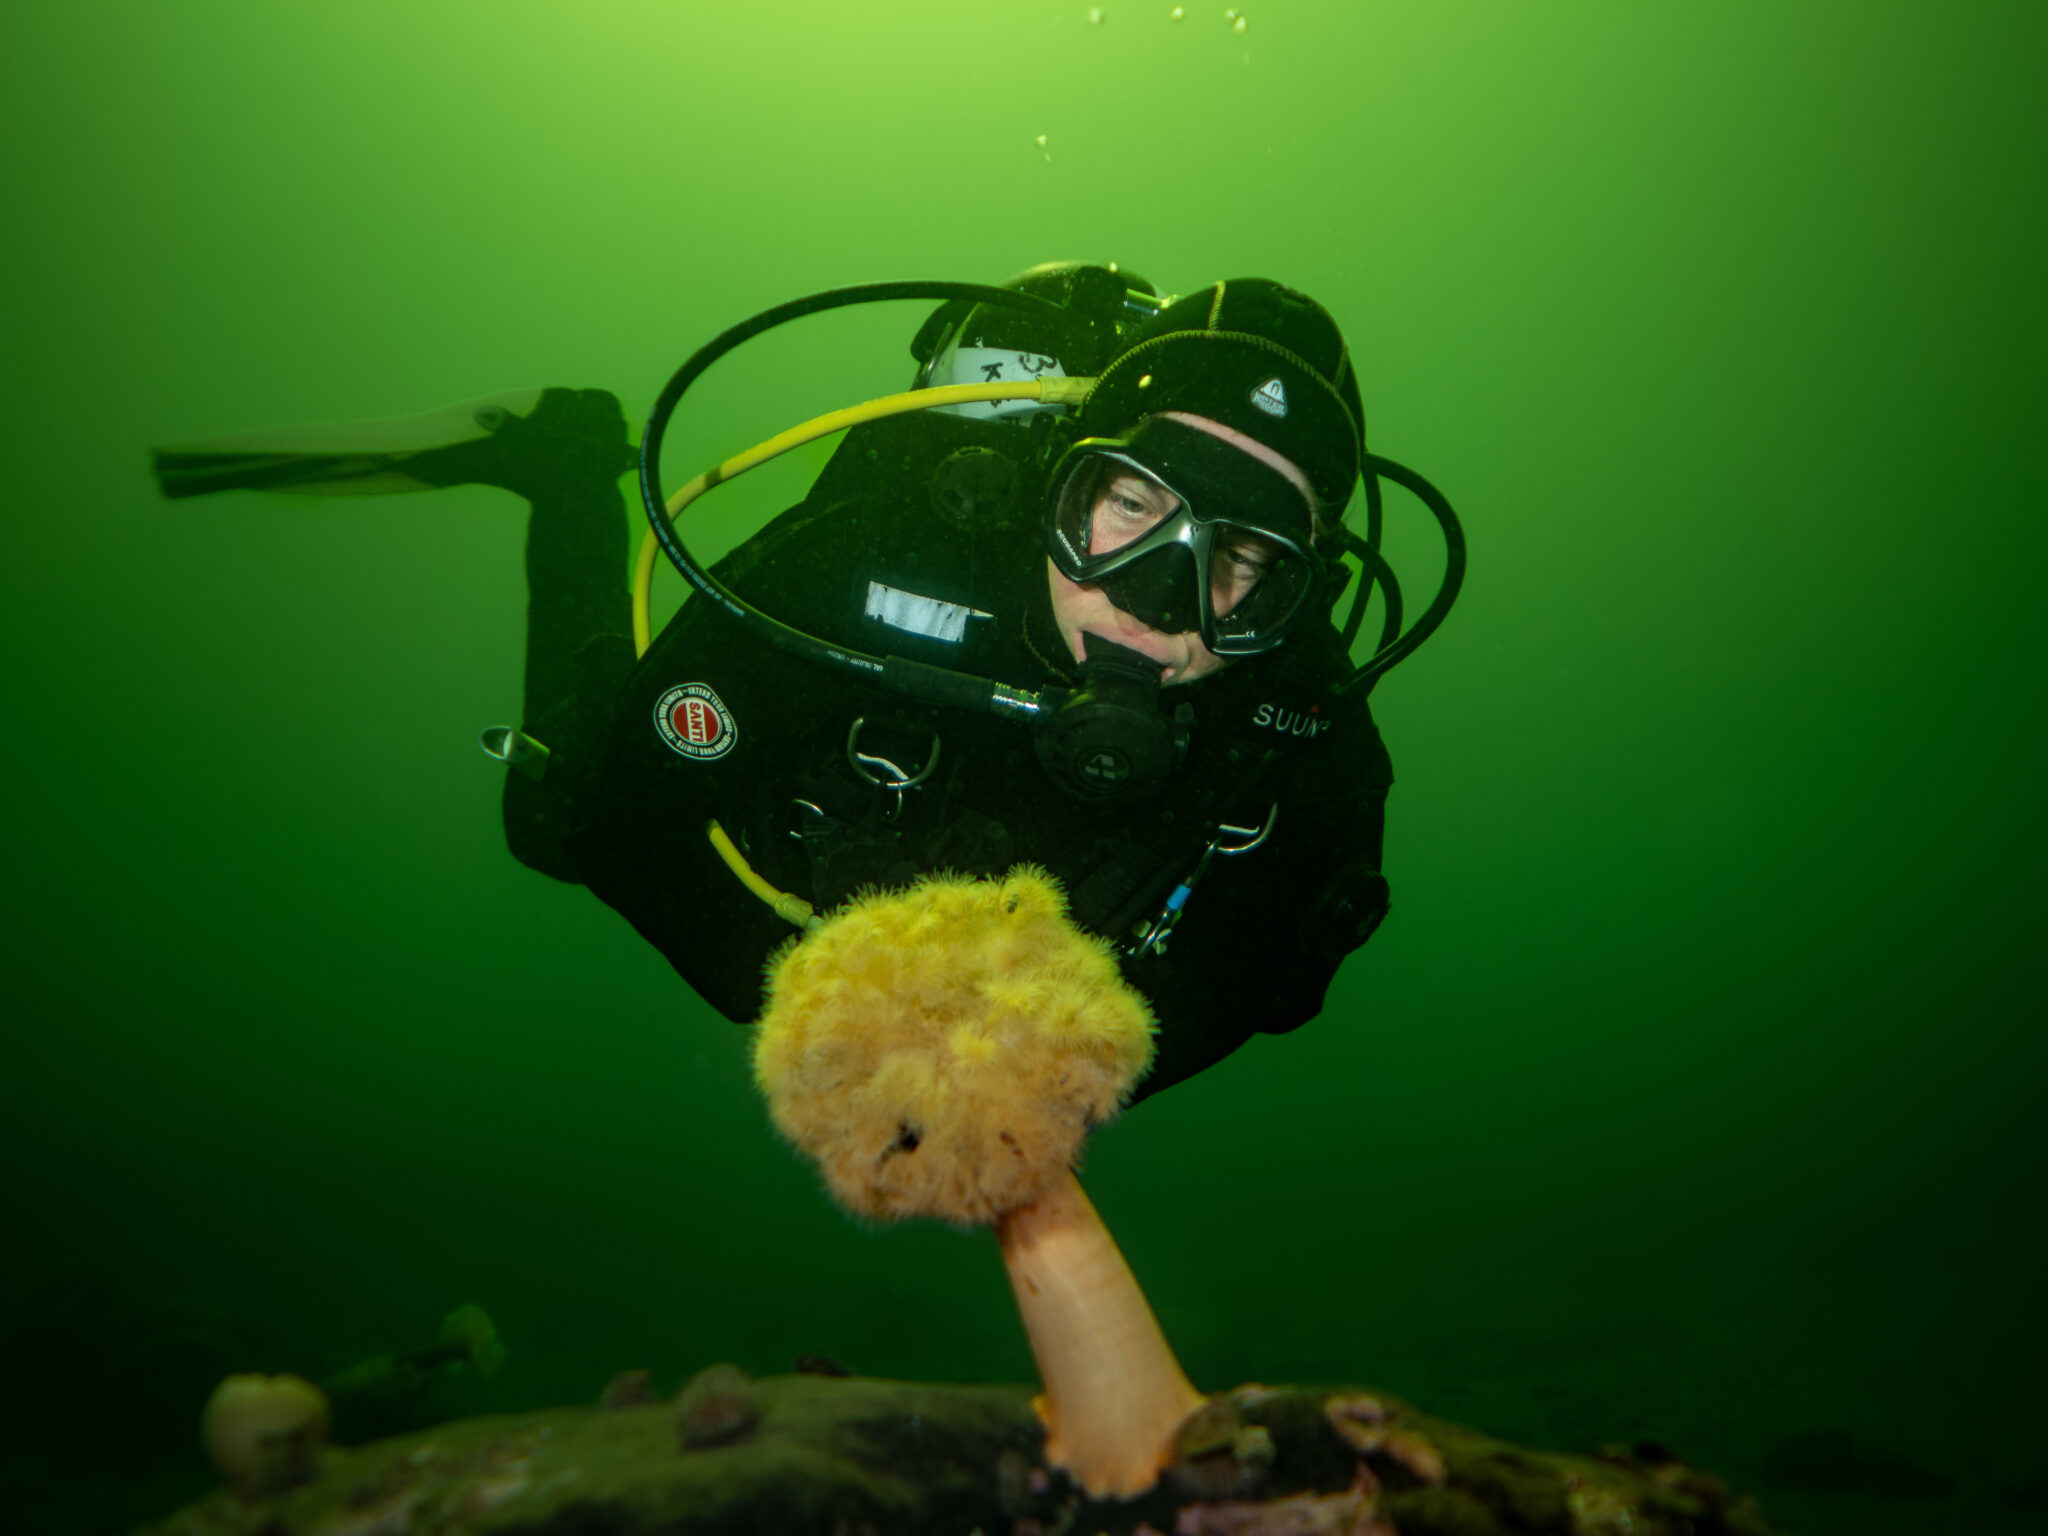 A diver explores the underwater world of the UK, looking at some cold water coral